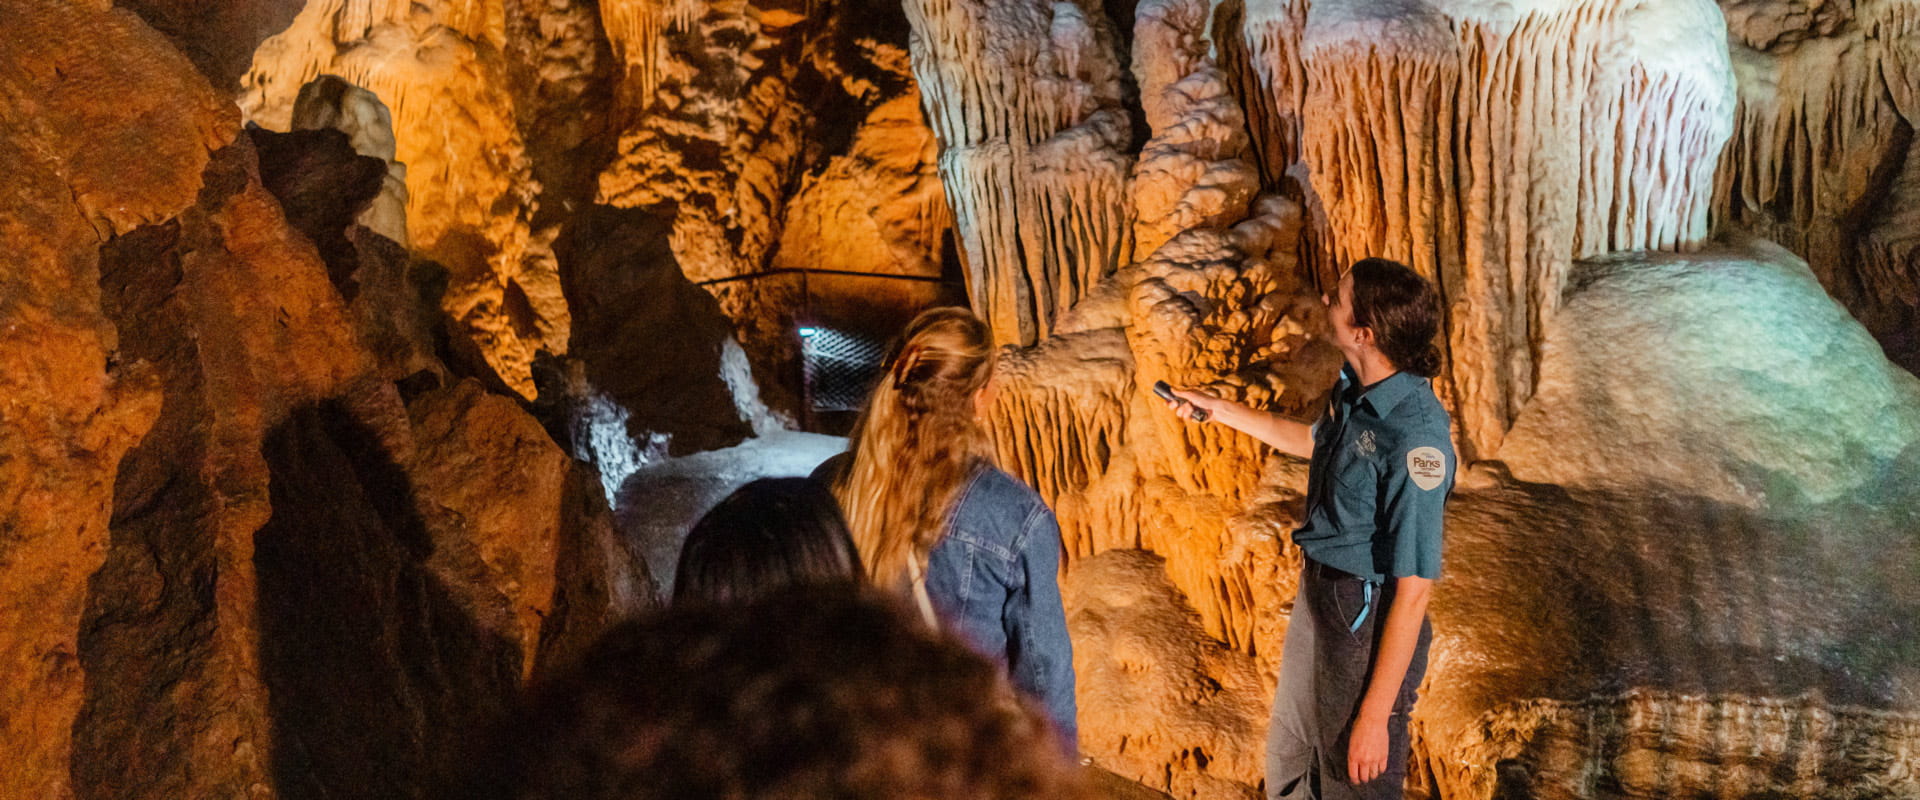 A park ranger shines a small torchlight onto the grand limestone formations during a cave tour.